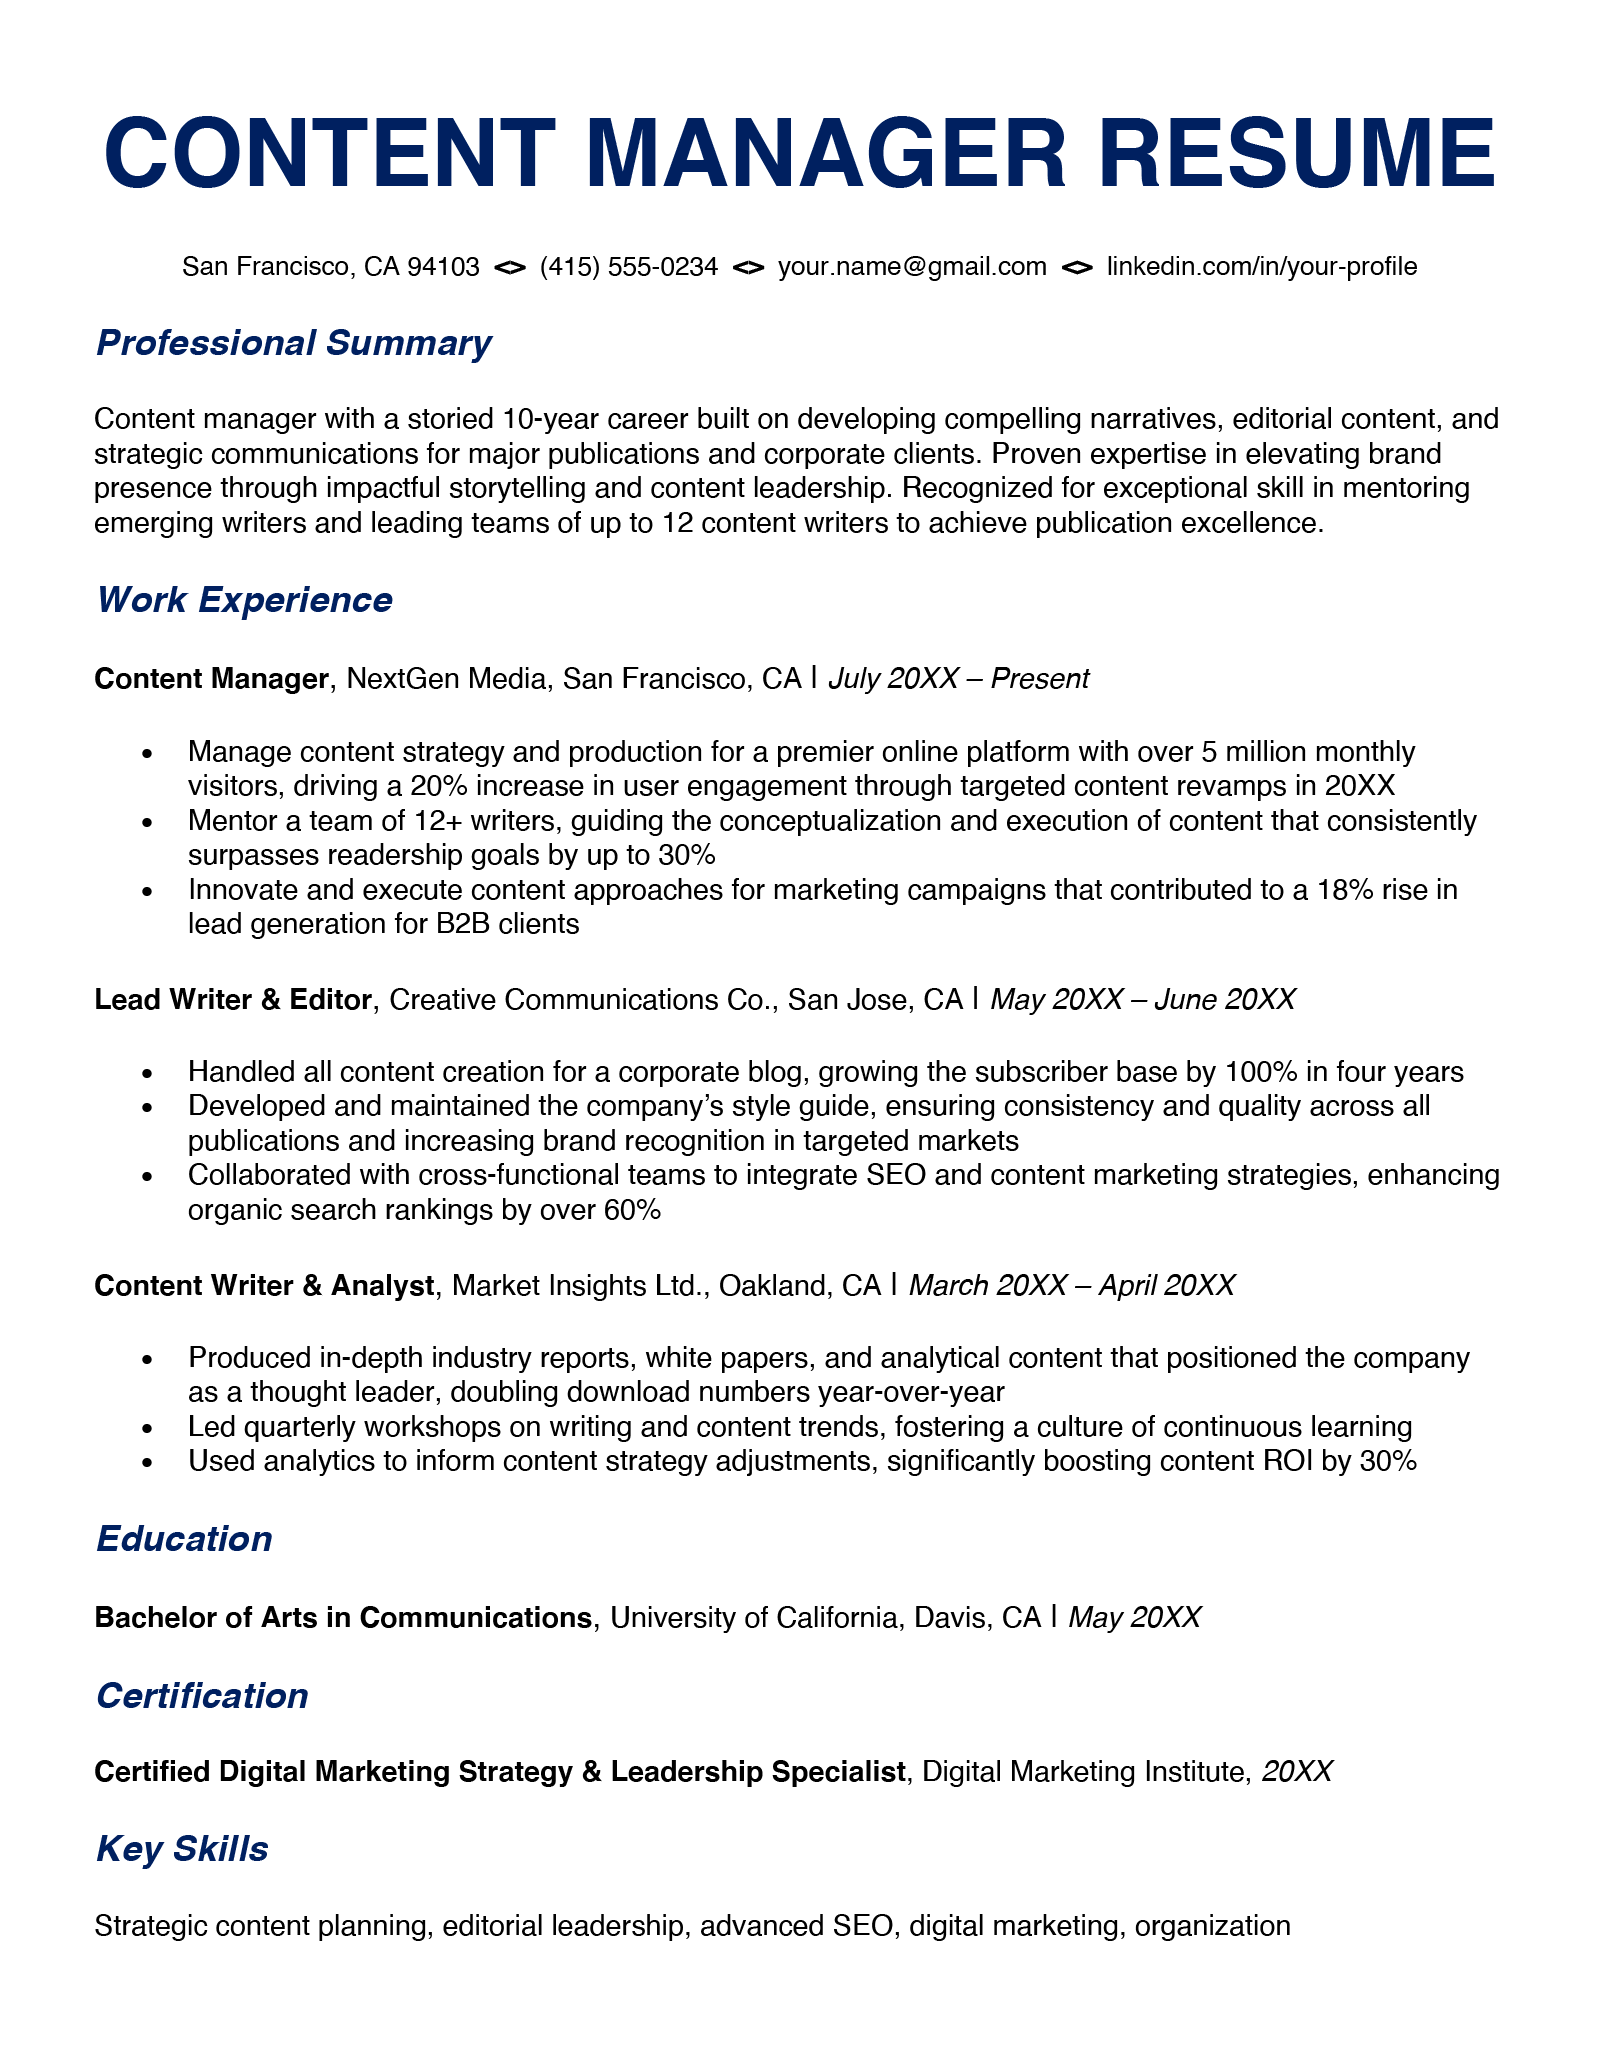 A content manager resume example with blue header text